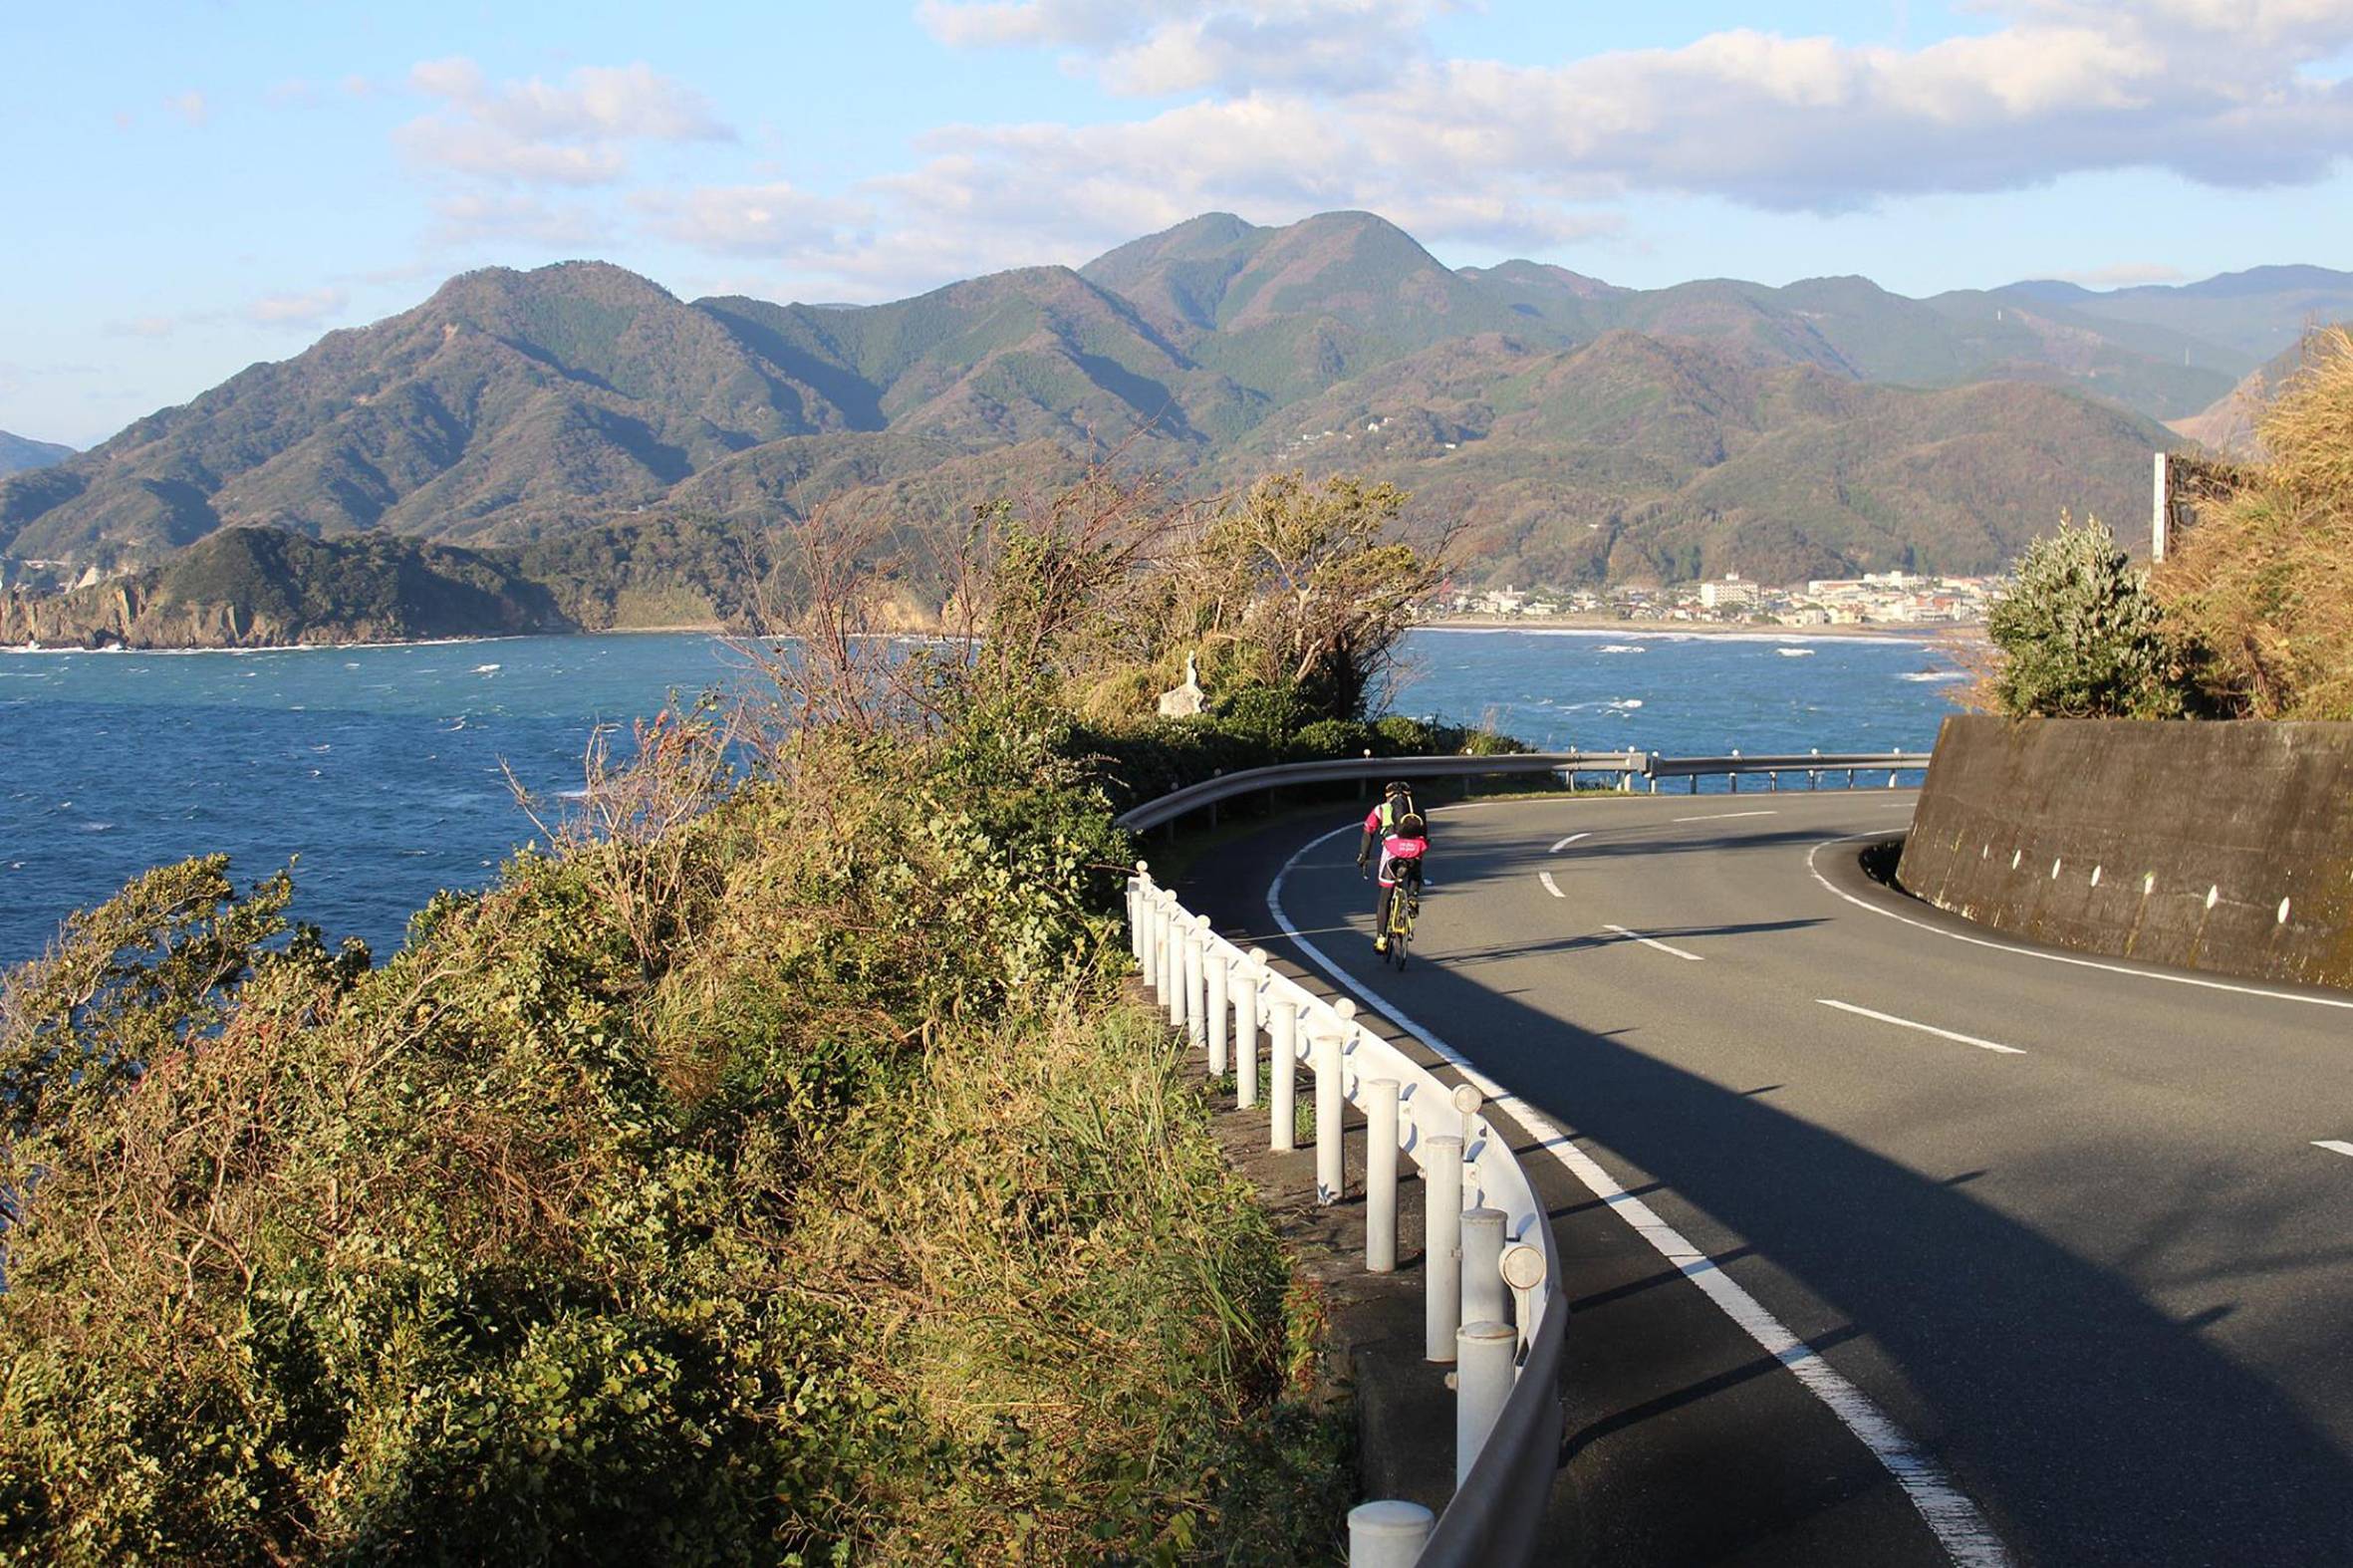 Cycling enthusiasts take part in a ride co-organized by the Izu Development Association and Suruga Bank. | COURTESY OF THE IZU DEVELOPMENT ASSOCIATION